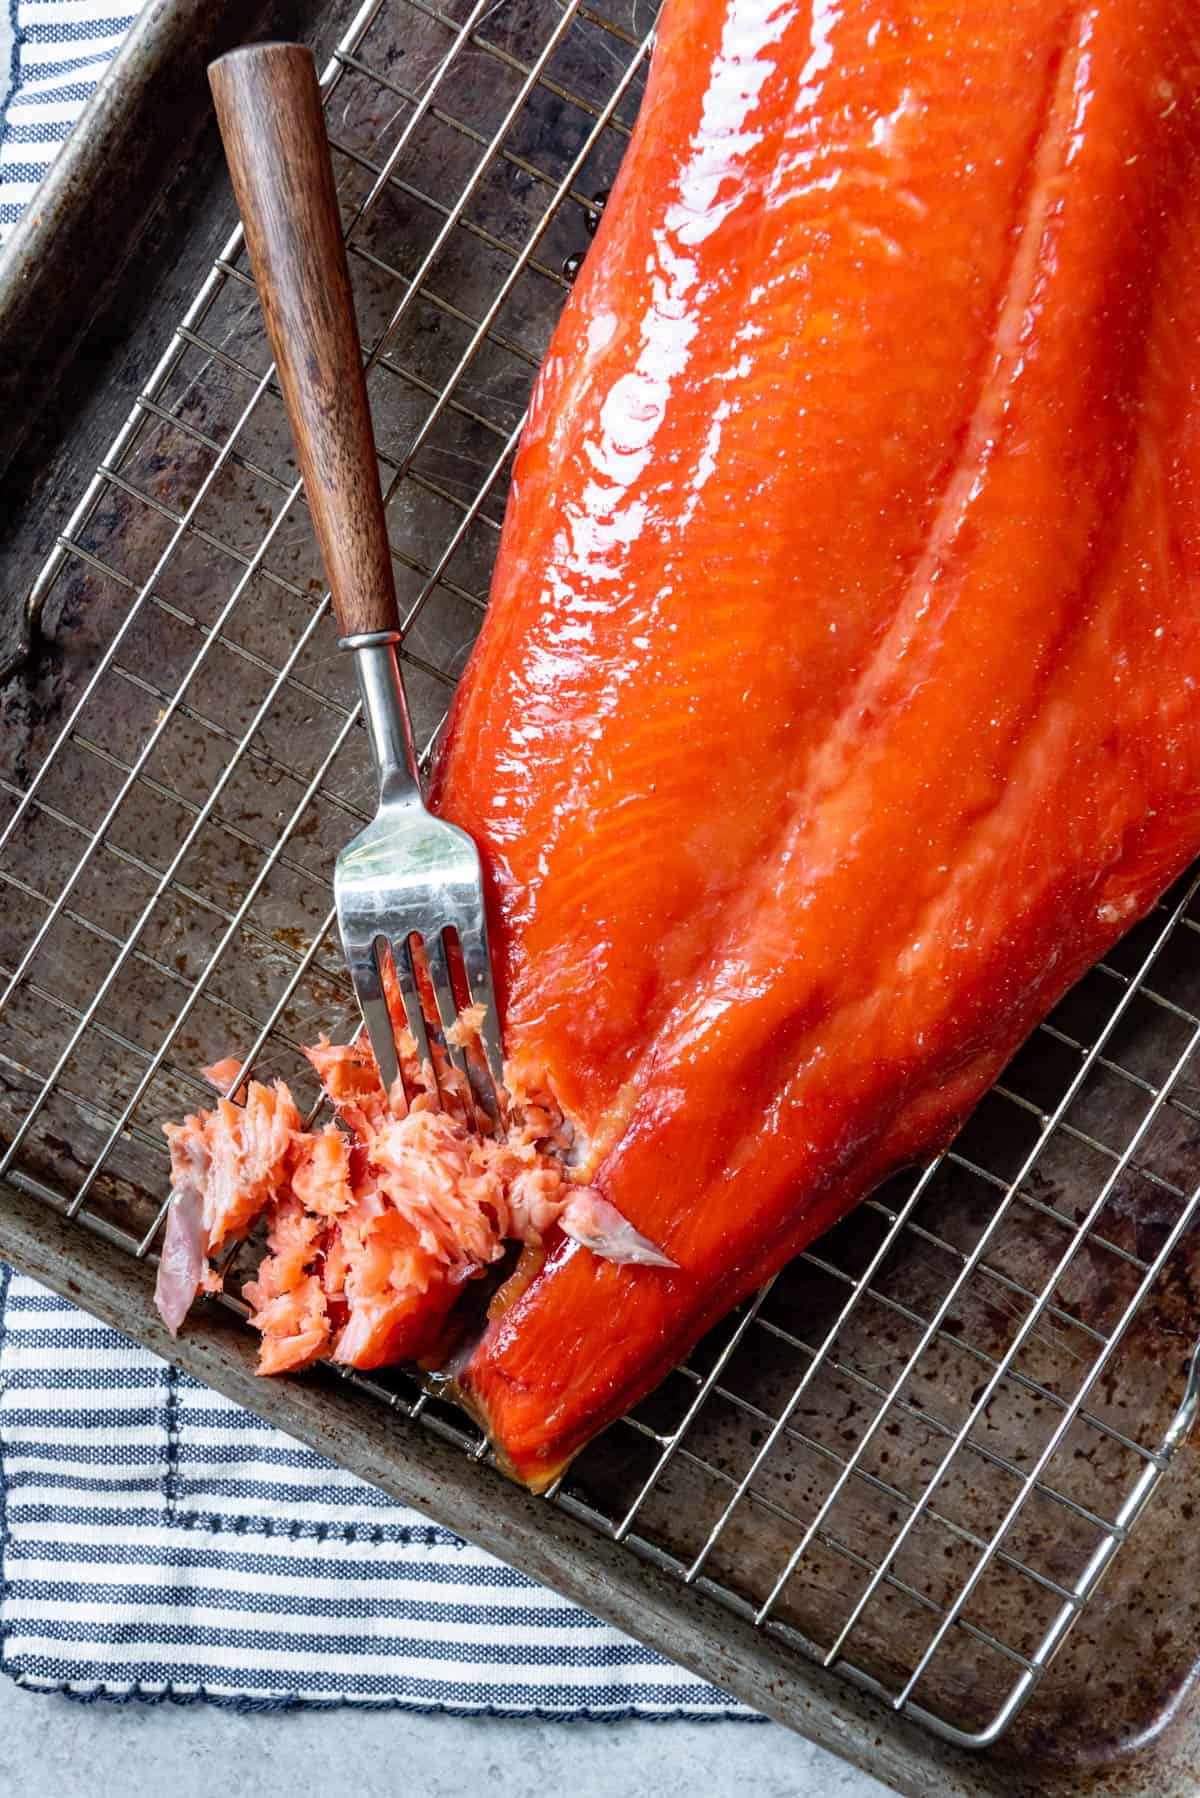 An image of smoked salmon being flaked with a fork.